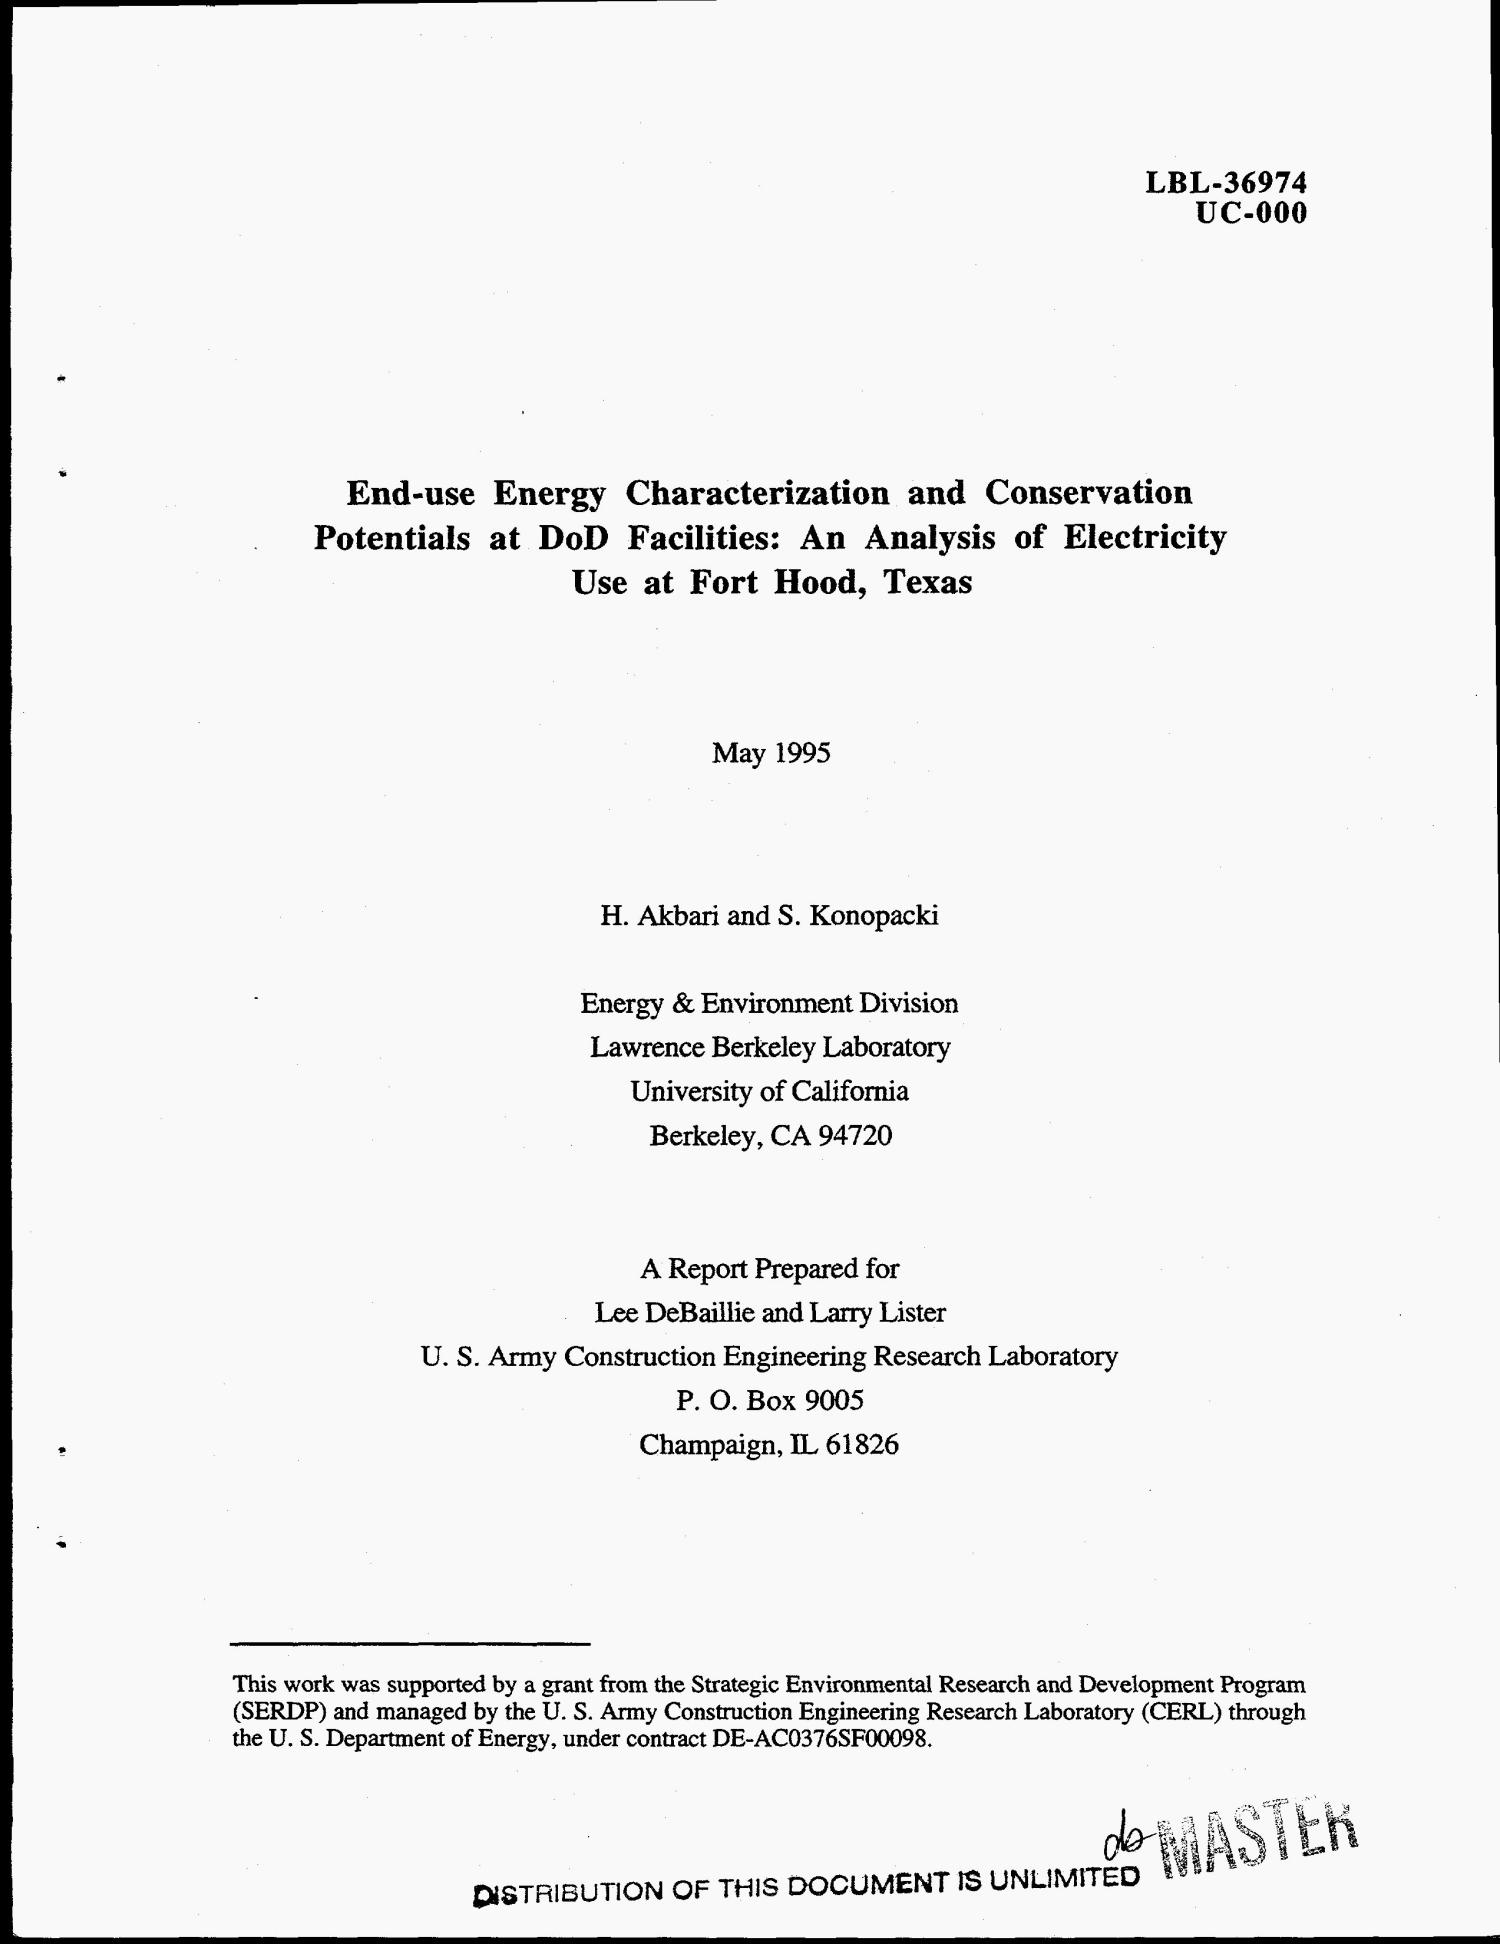 End-use energy characterization and conservation potentials at DoD Facilities: An analysis of electricity use at Fort Hood, Texas
                                                
                                                    [Sequence #]: 4 of 260
                                                